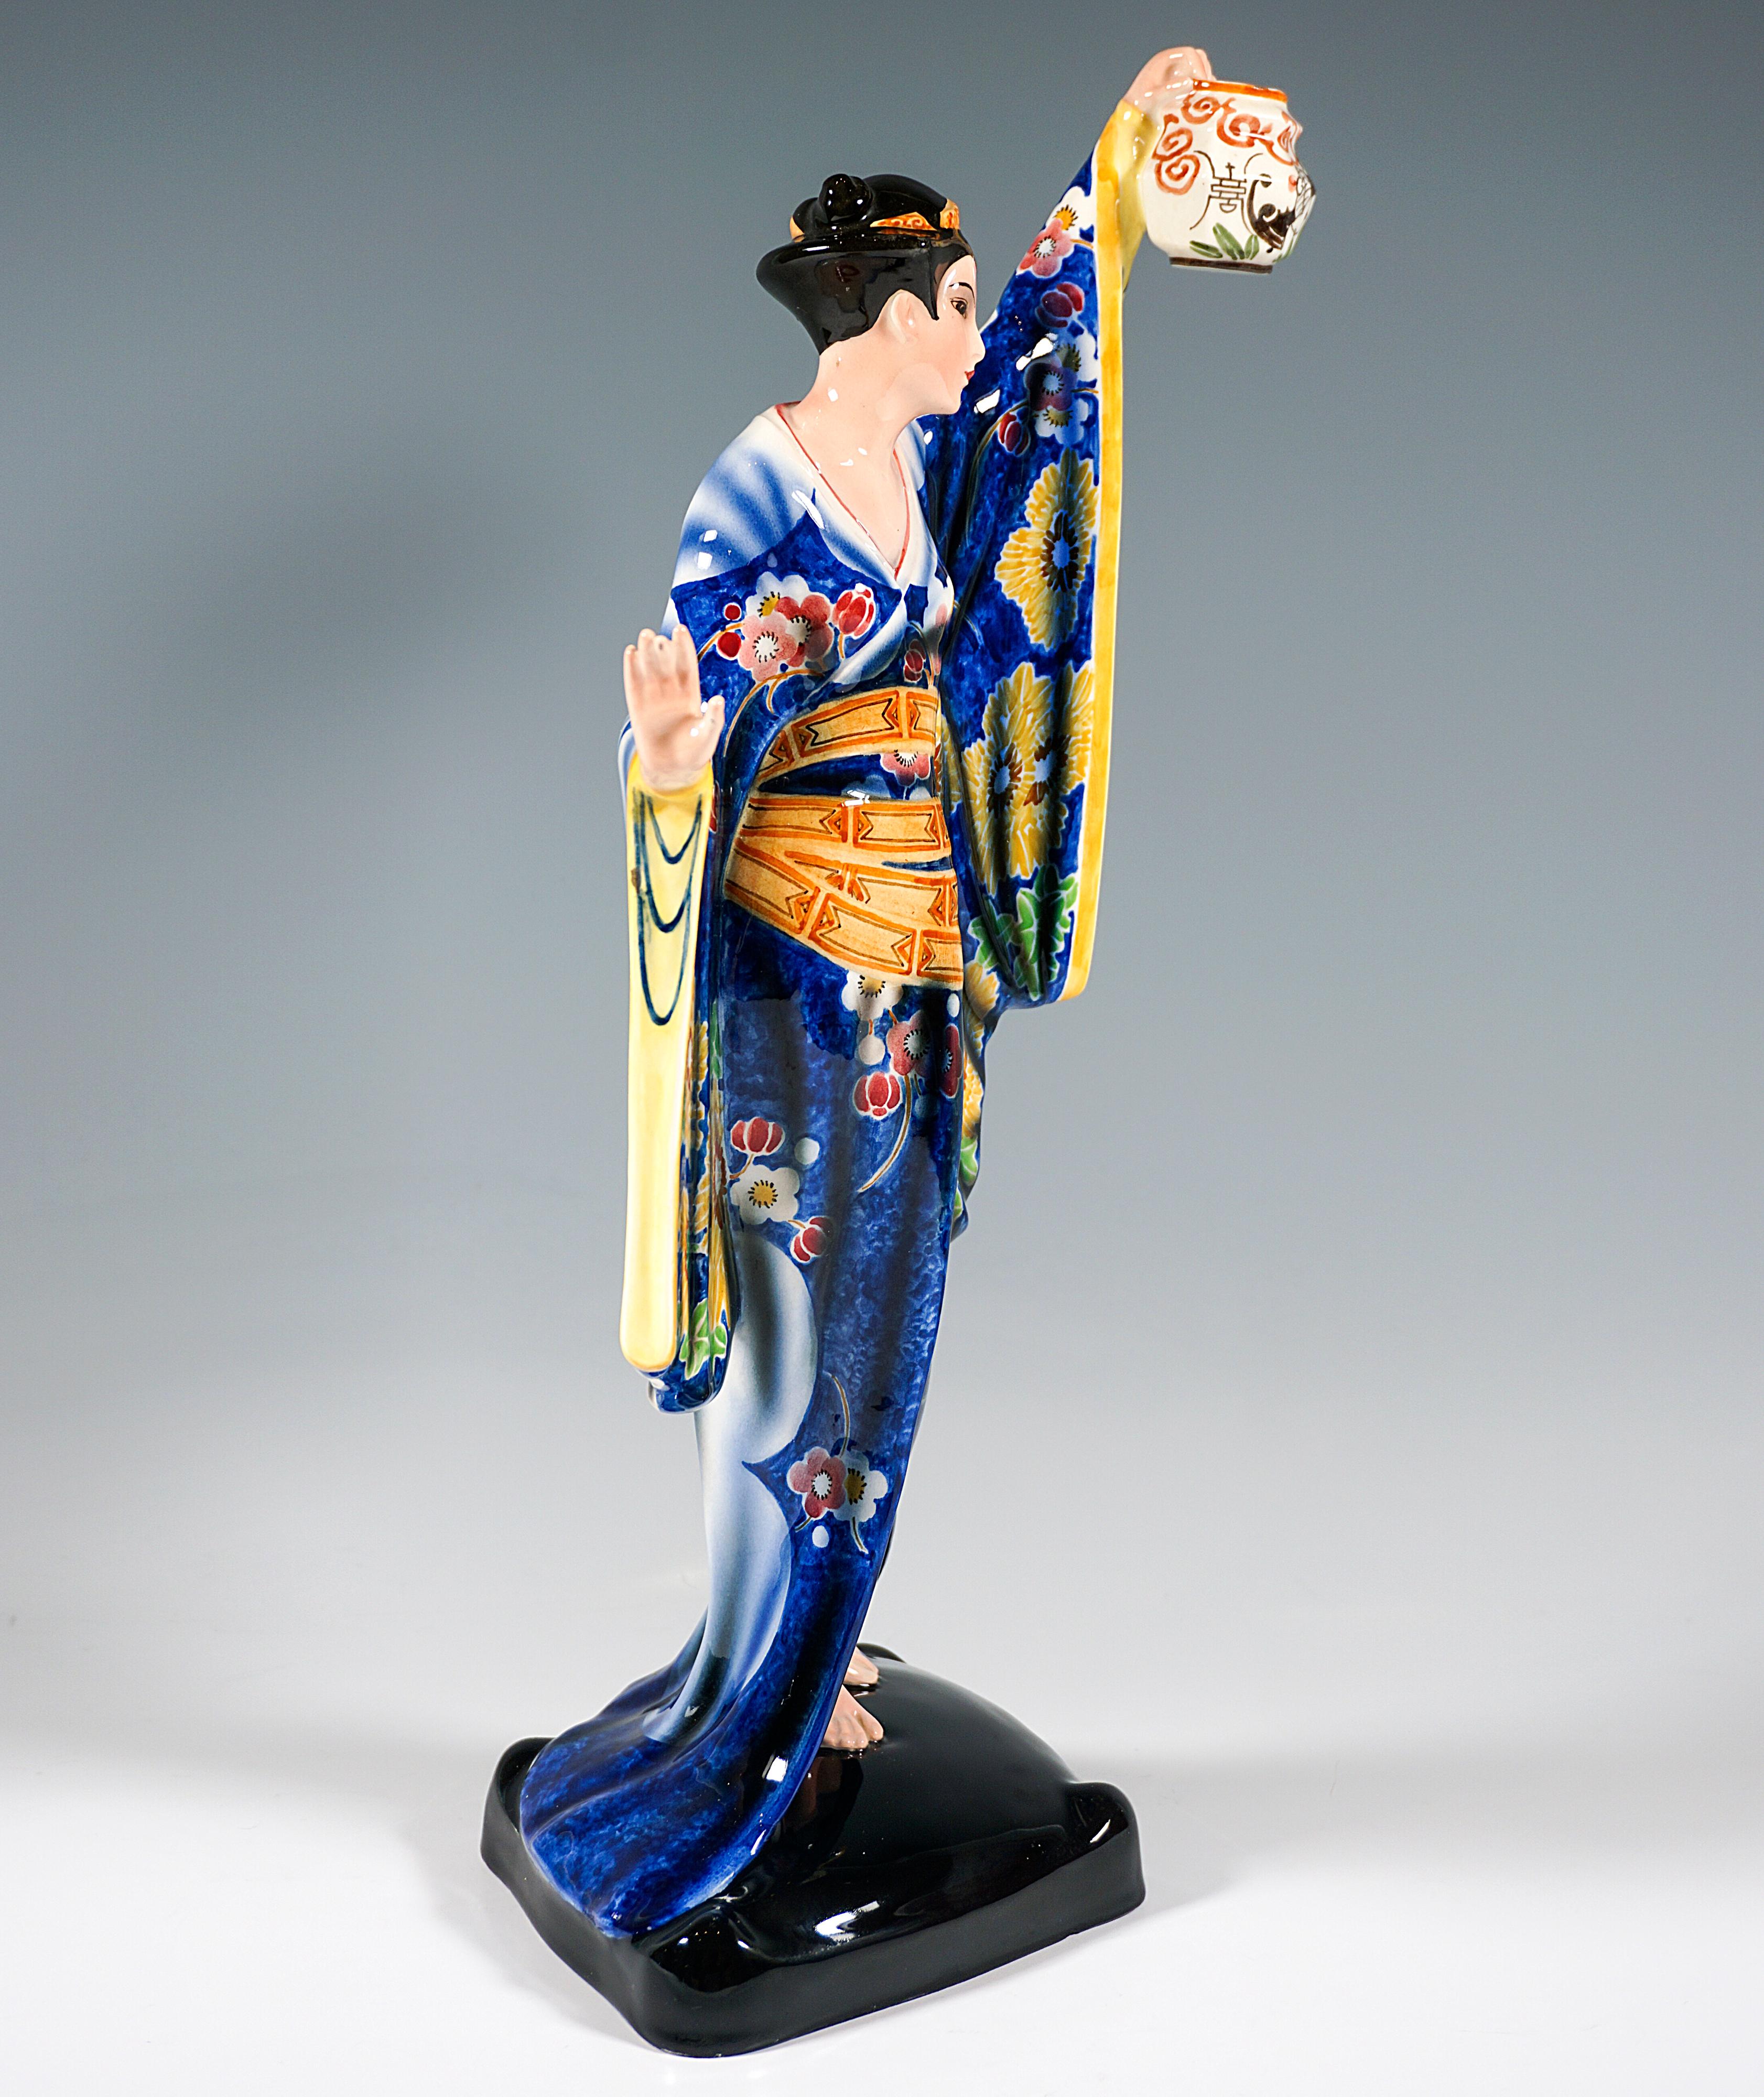 Rare and excellent Goldscheider art ceramic figure of the 1930's: 
Young standing Japanese woman in traditional kimono with wide sleeves and colored floral decoration on dark blue background, tiara in her upswept hair, looking to the left holding a